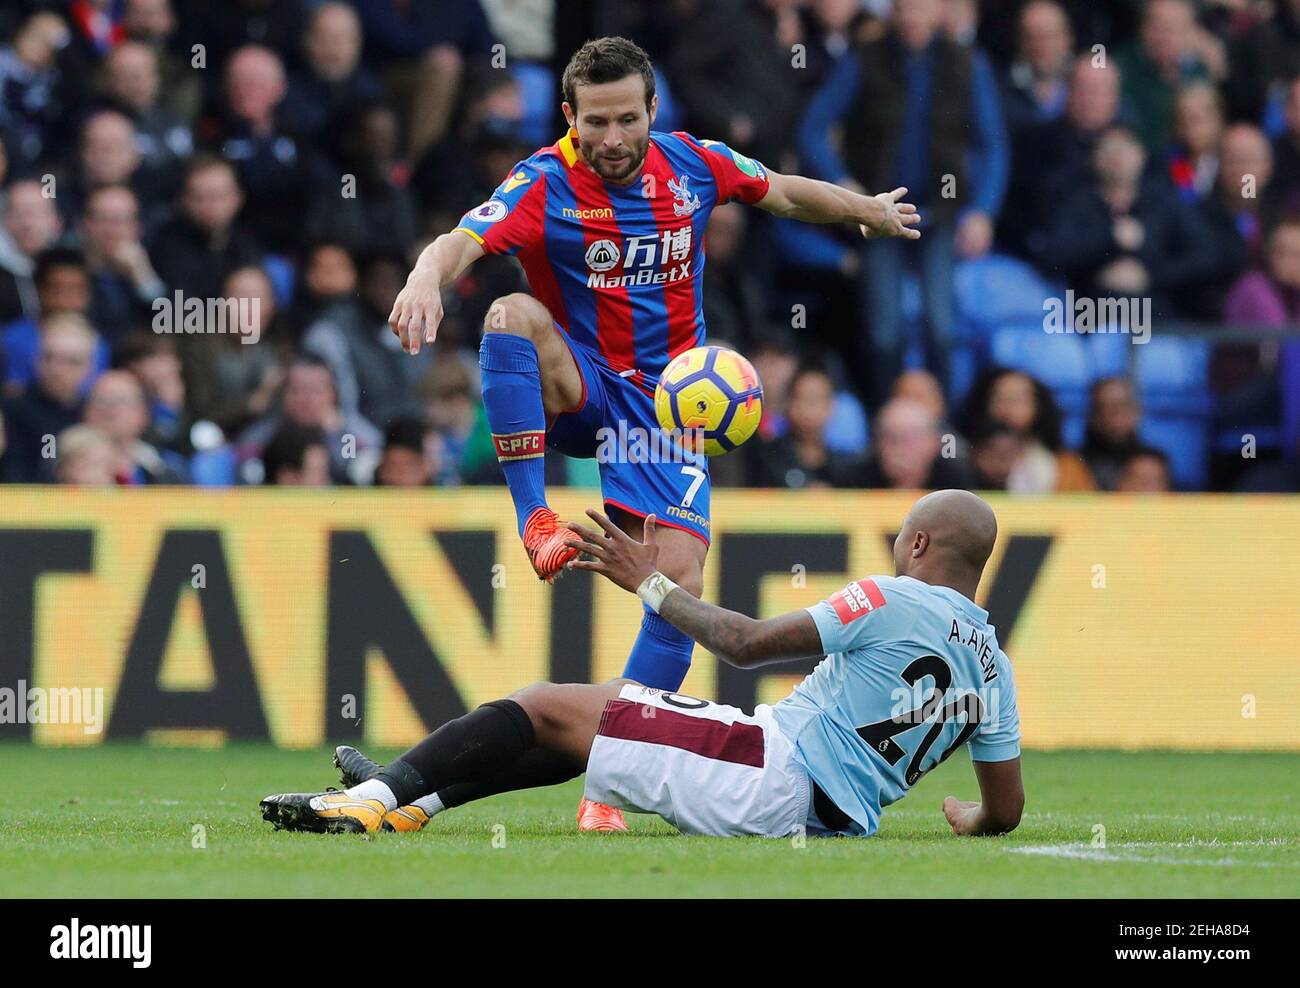 Soccer Football - Premier League - Crystal Palace vs West Ham United - Selhurst Park, London, Britain - October 28, 2017   Crystal Palace's Yohan Cabaye in action with West Ham United's Andre Ayew    REUTERS/Eddie Keogh    EDITORIAL USE ONLY. No use with unauthorized audio, video, data, fixture lists, club/league logos or "live" services. Online in-match use limited to 75 images, no video emulation. No use in betting, games or single club/league/player publications. Please contact your account representative for further details.? Stock Photo